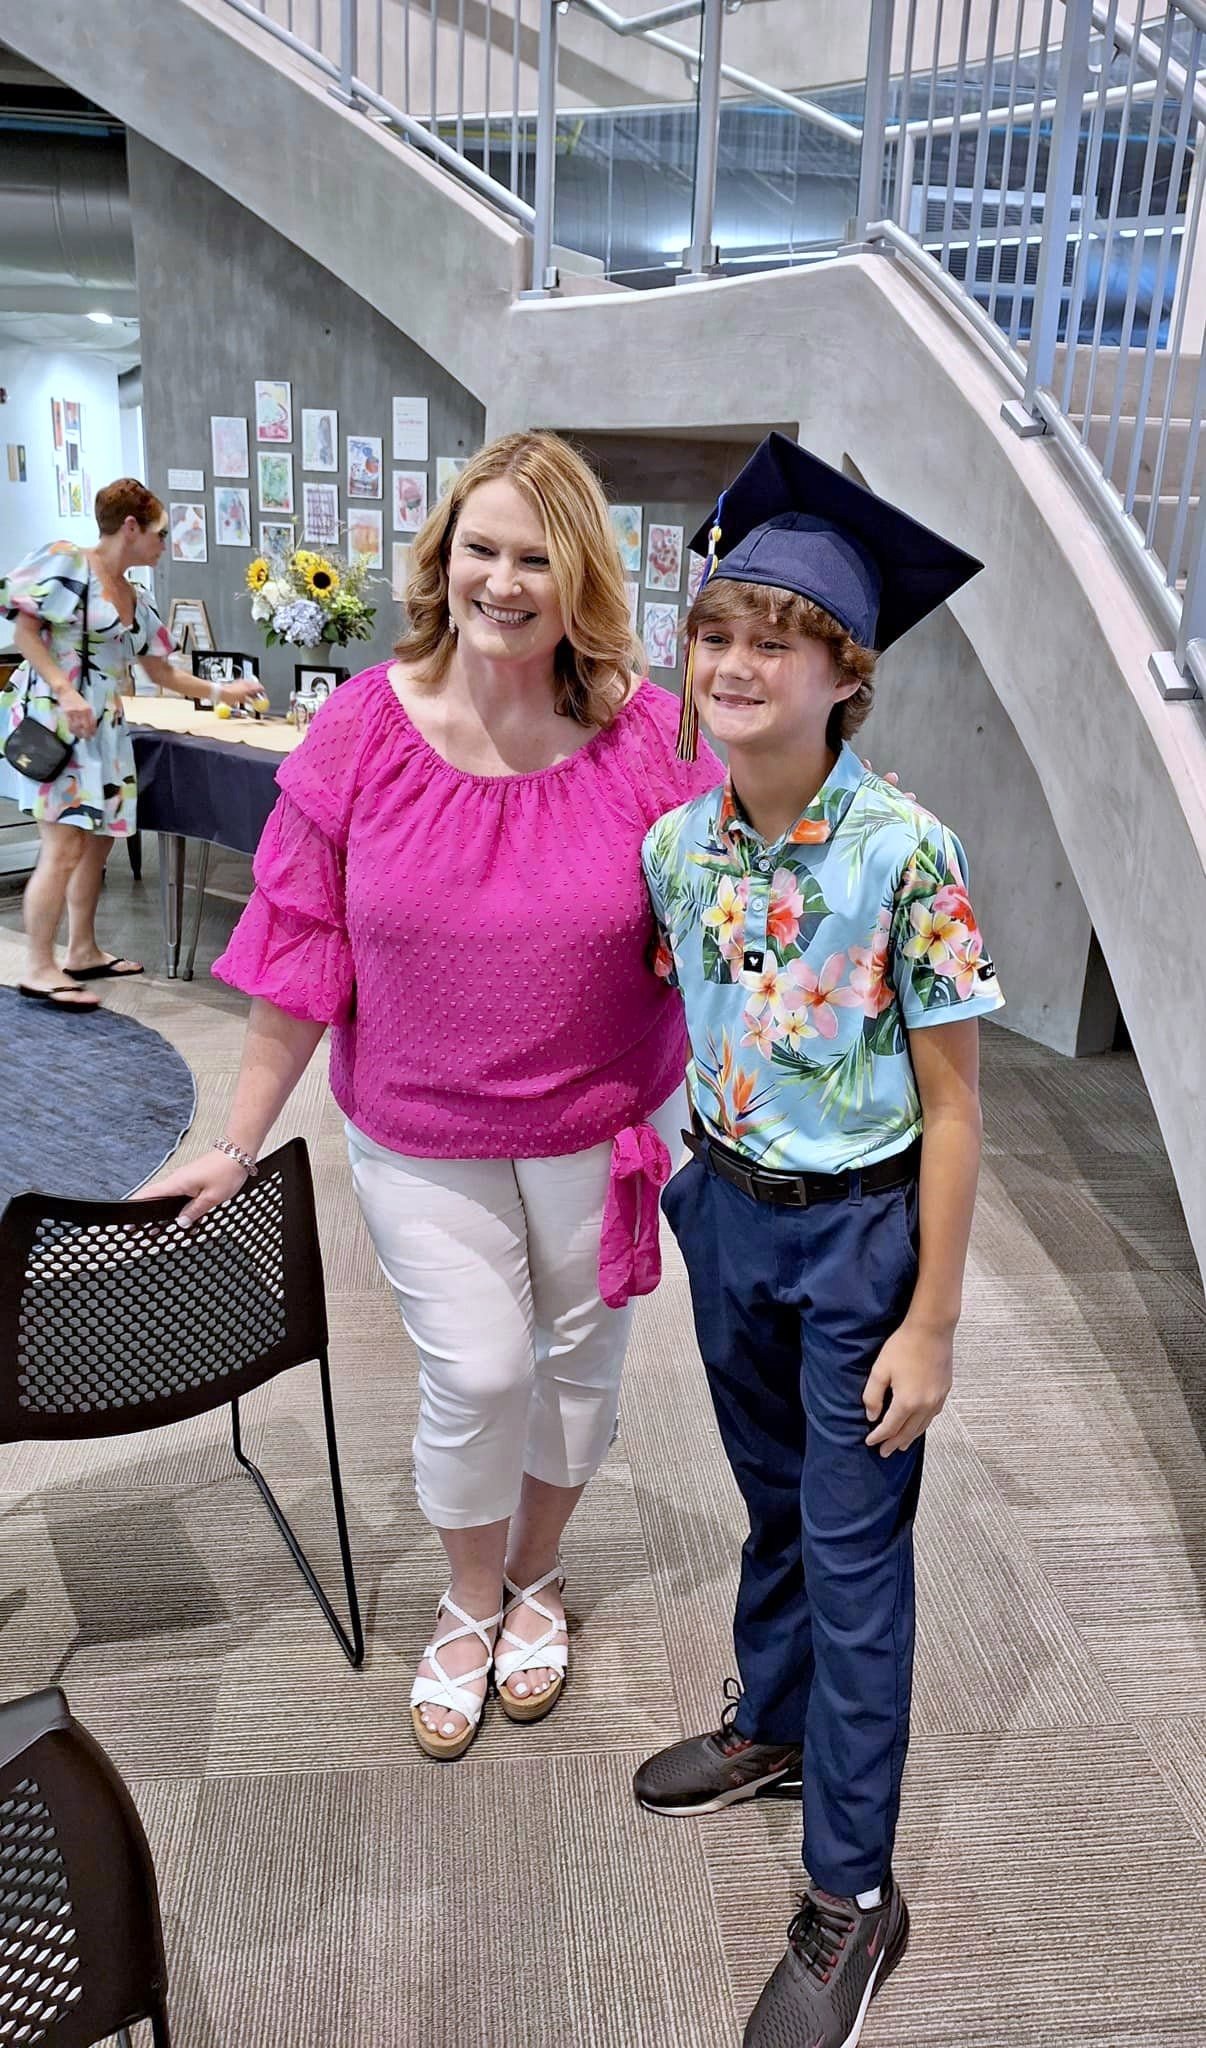 School for Learning Disabilities celebrates students' 8th Grade Graduation at Educational Pathways Academy, School for Dyslexia in Florida.jpg